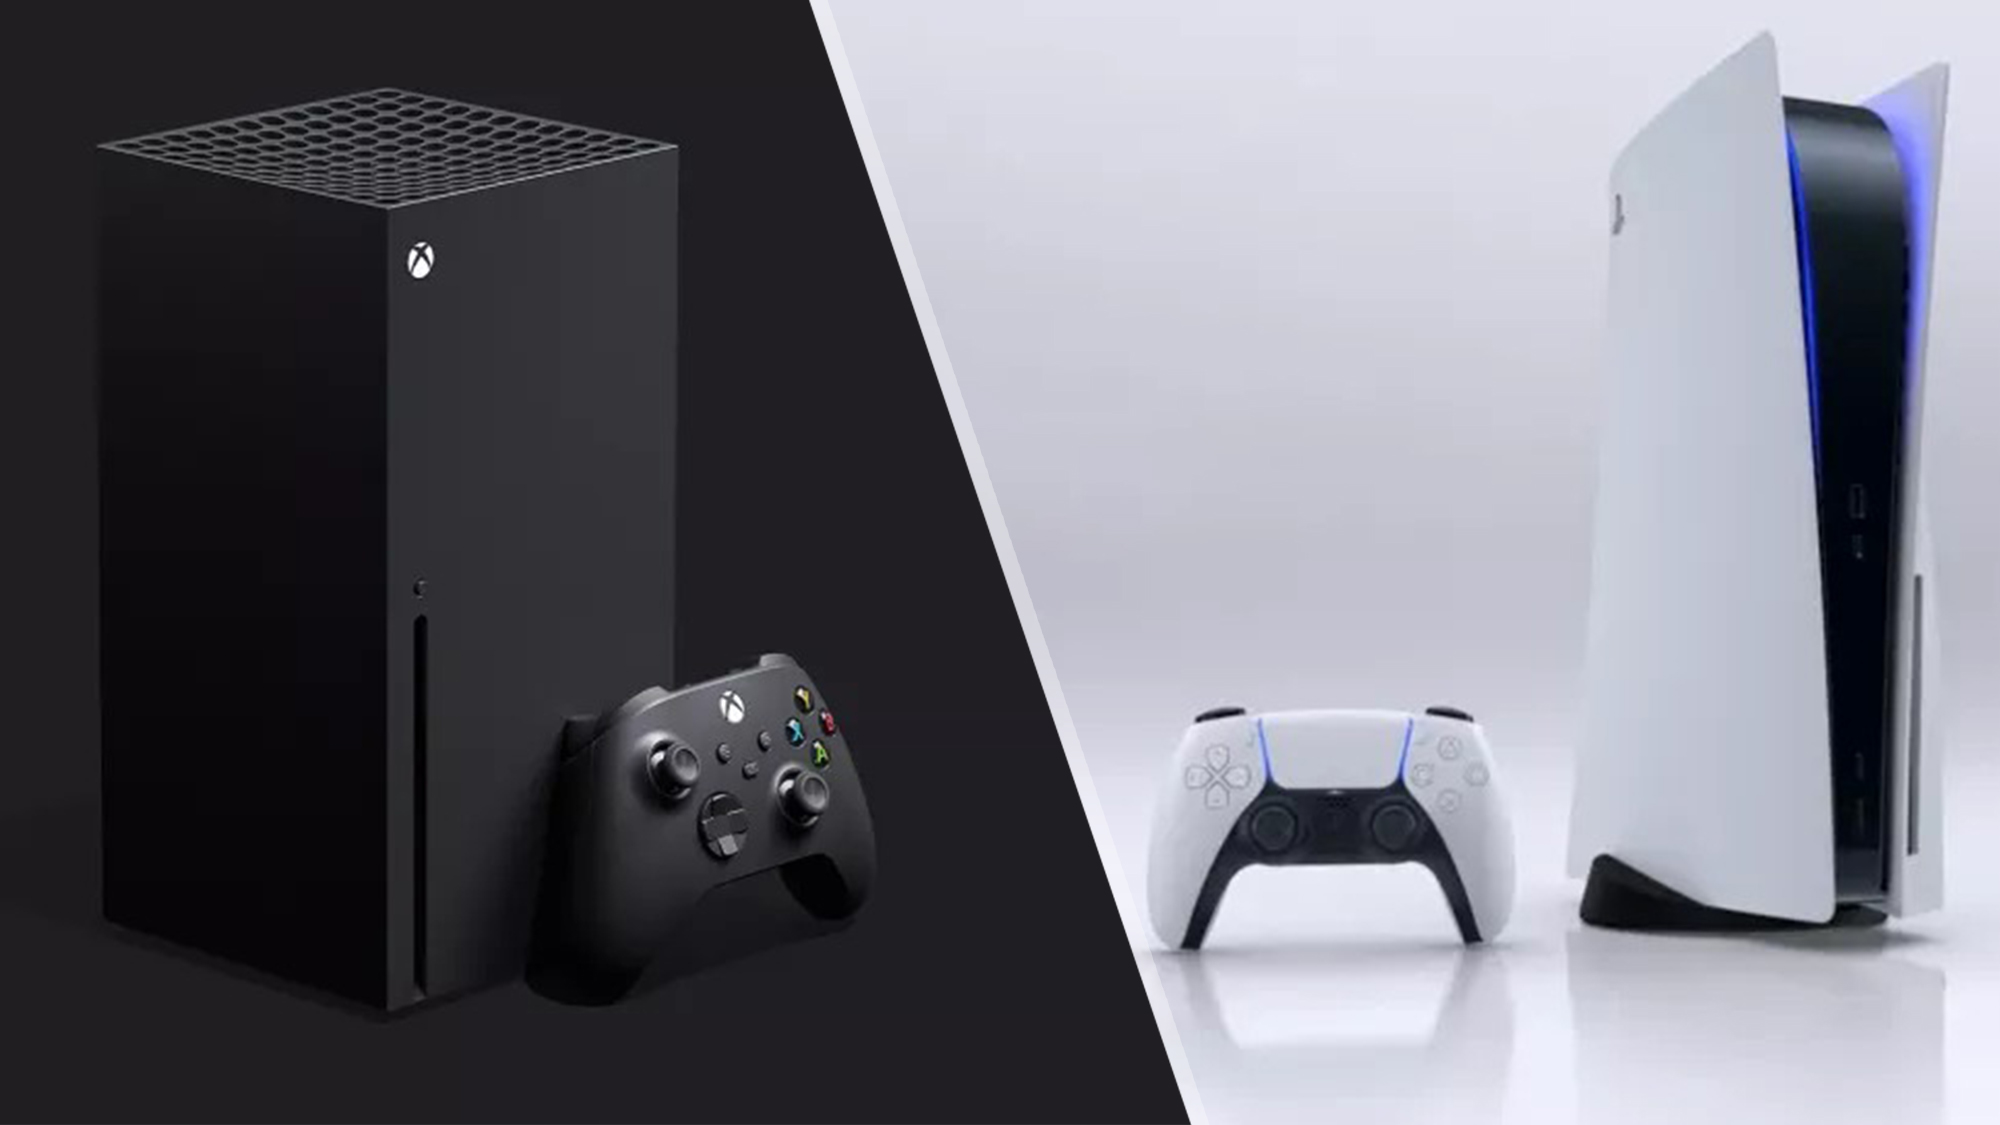 which came out first xbox or playstation